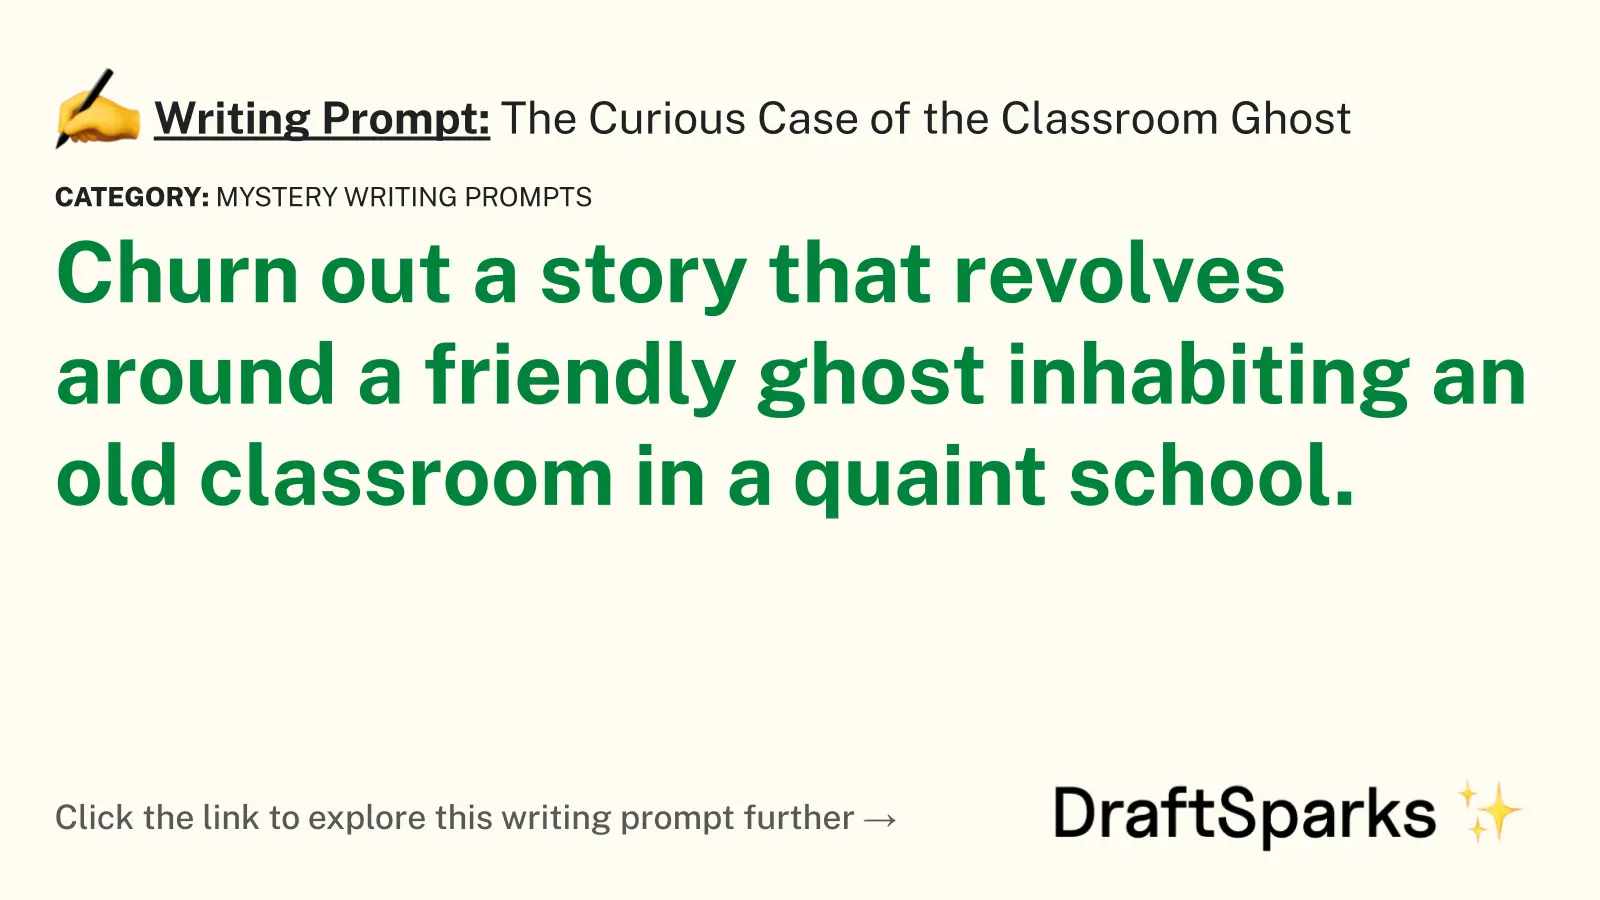 The Curious Case of the Classroom Ghost